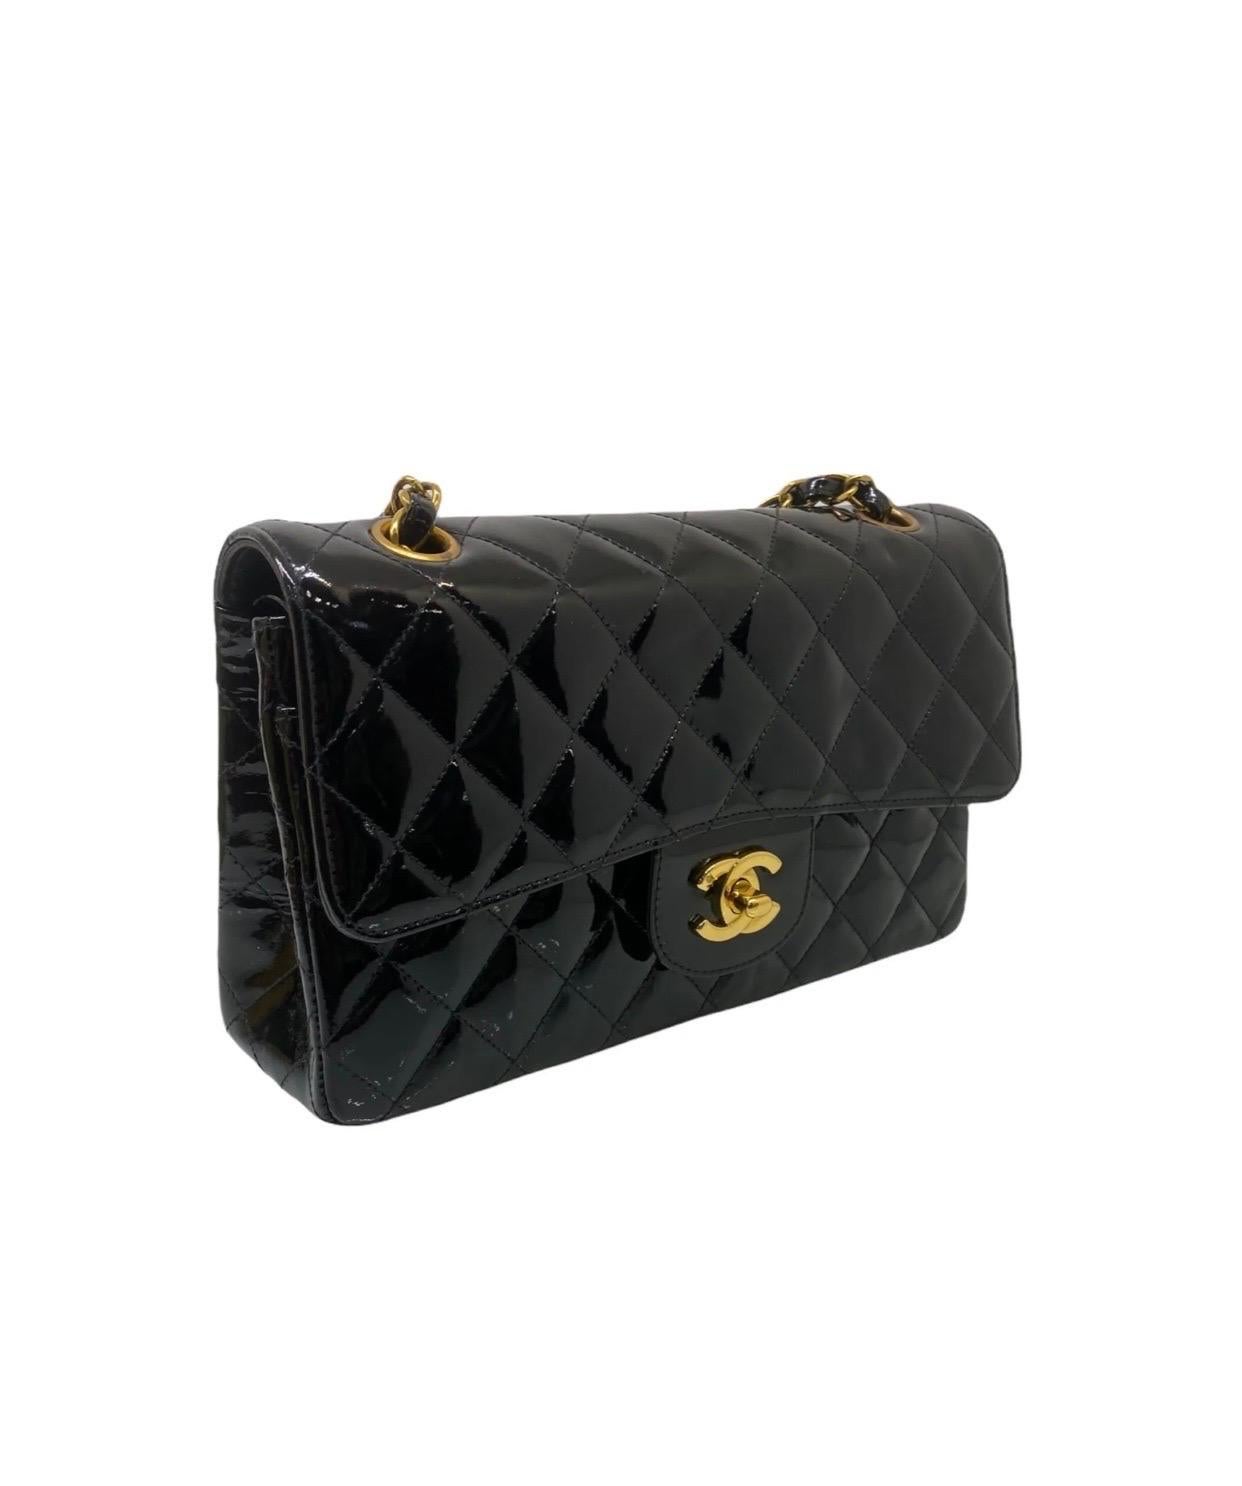 Chanel signed bag, model 2.55, year of production 1994-1996, made of black patent leather with gold hardware.

It has two front flaps, one with a twist lock and one inside with a button closure.

Internally lined in black leather, complete with